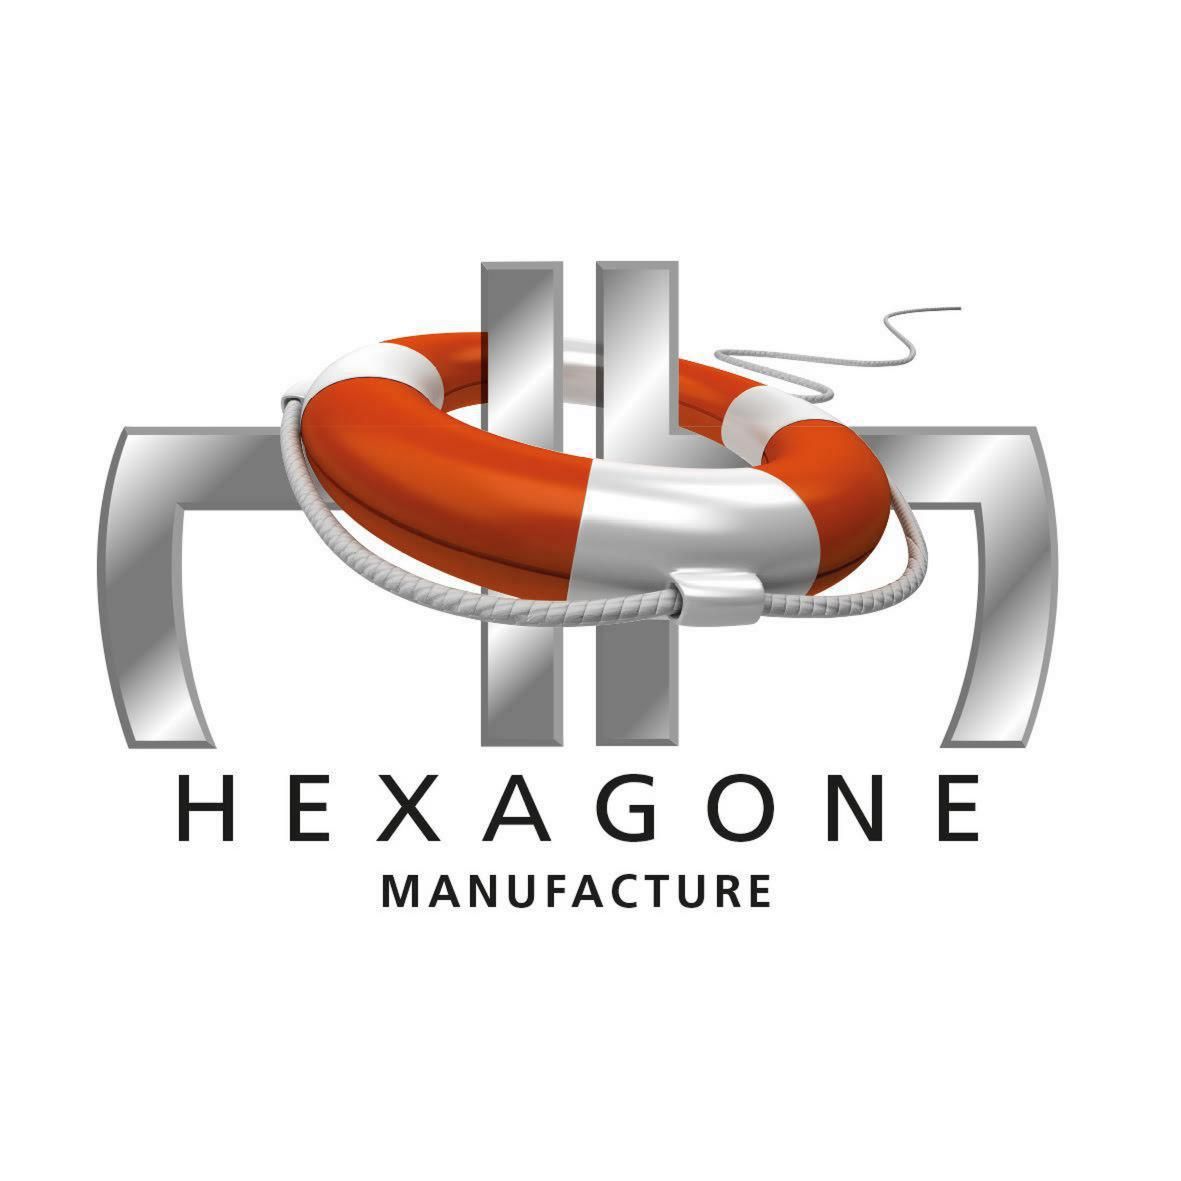 HEXAGONE MANUFACTURE ENTERED THE SPATEX'S CLUB